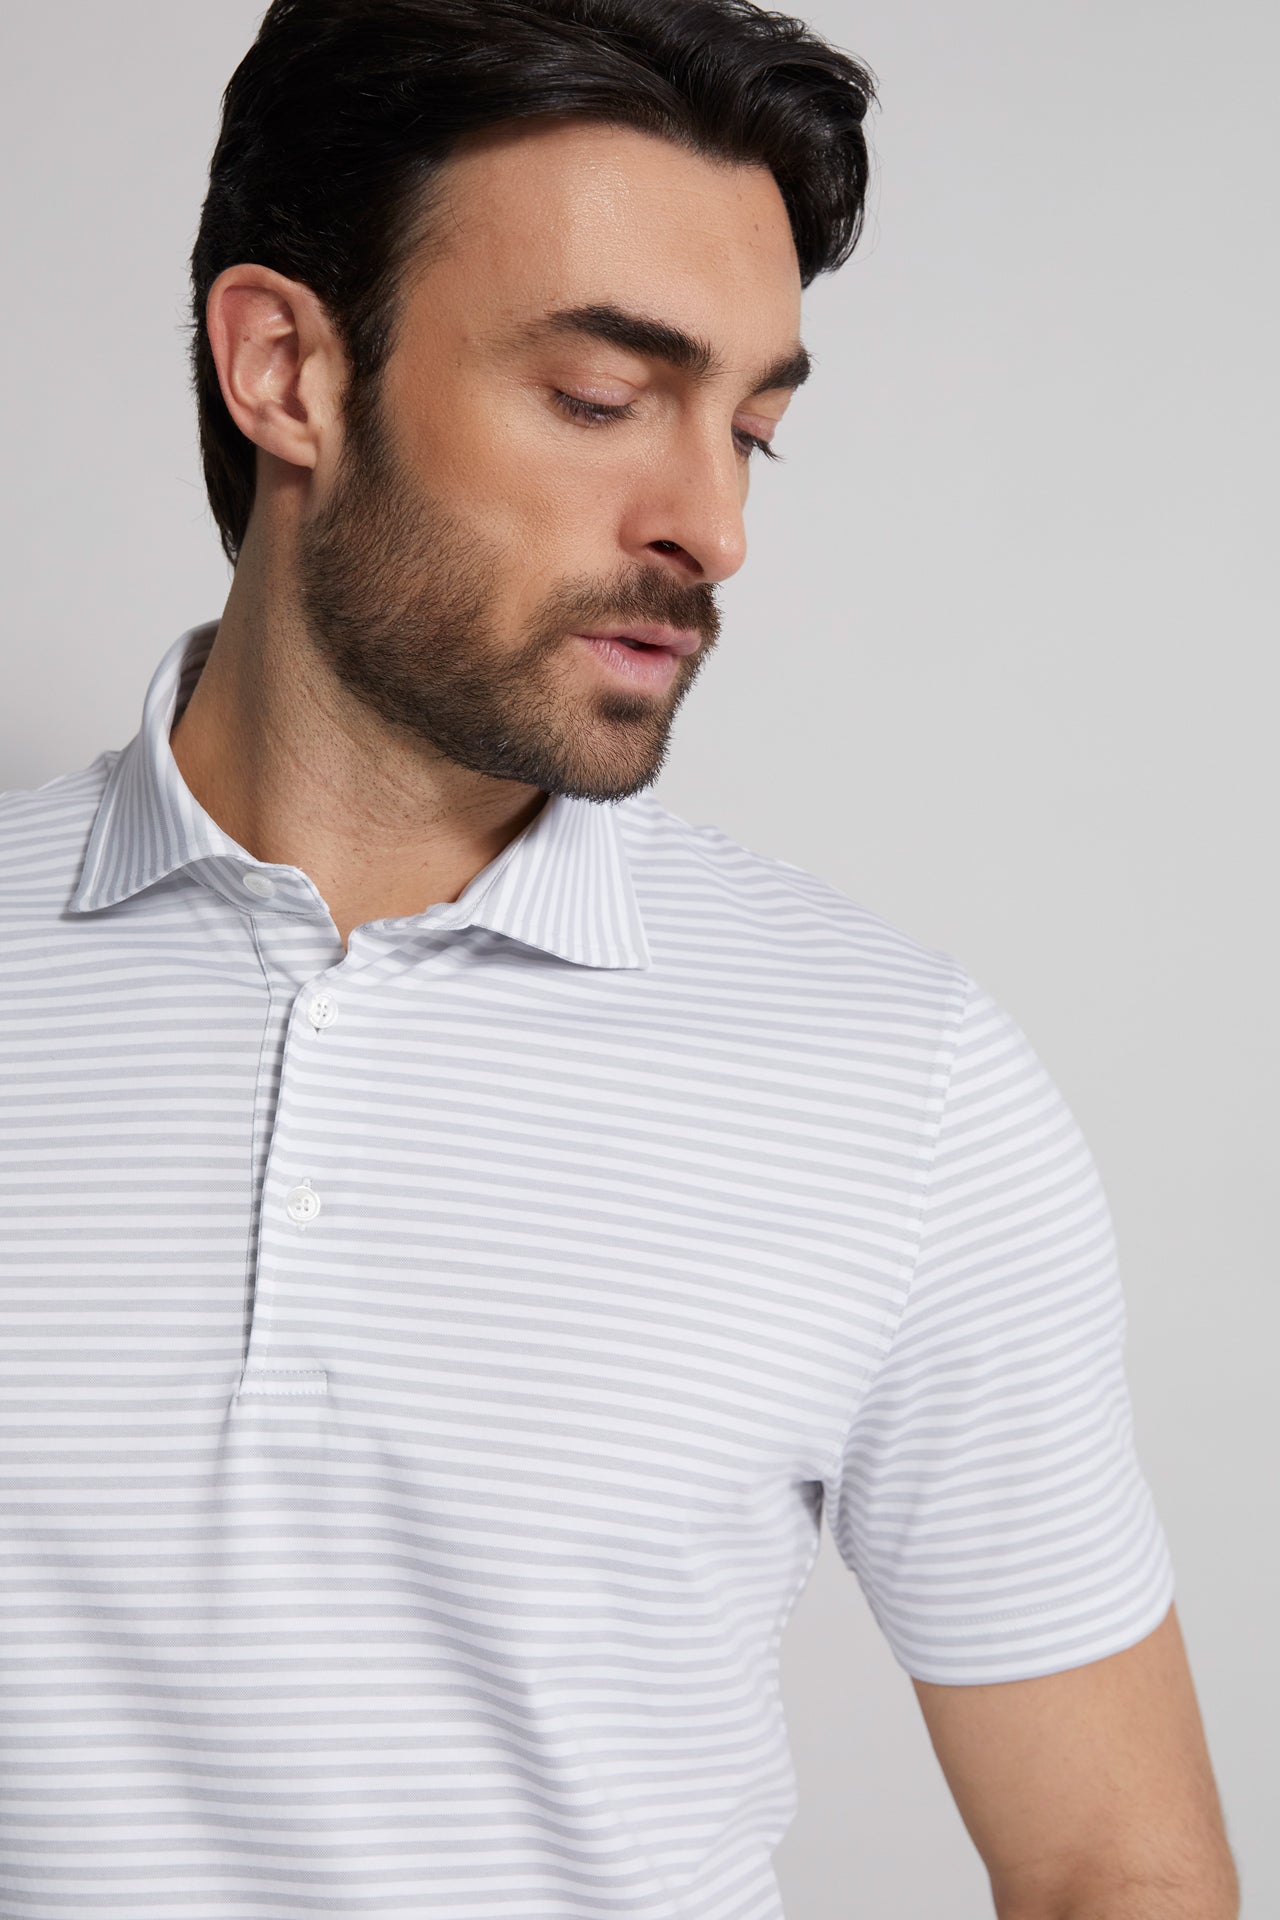 men's striped polo t-shirt grey and white - front detail